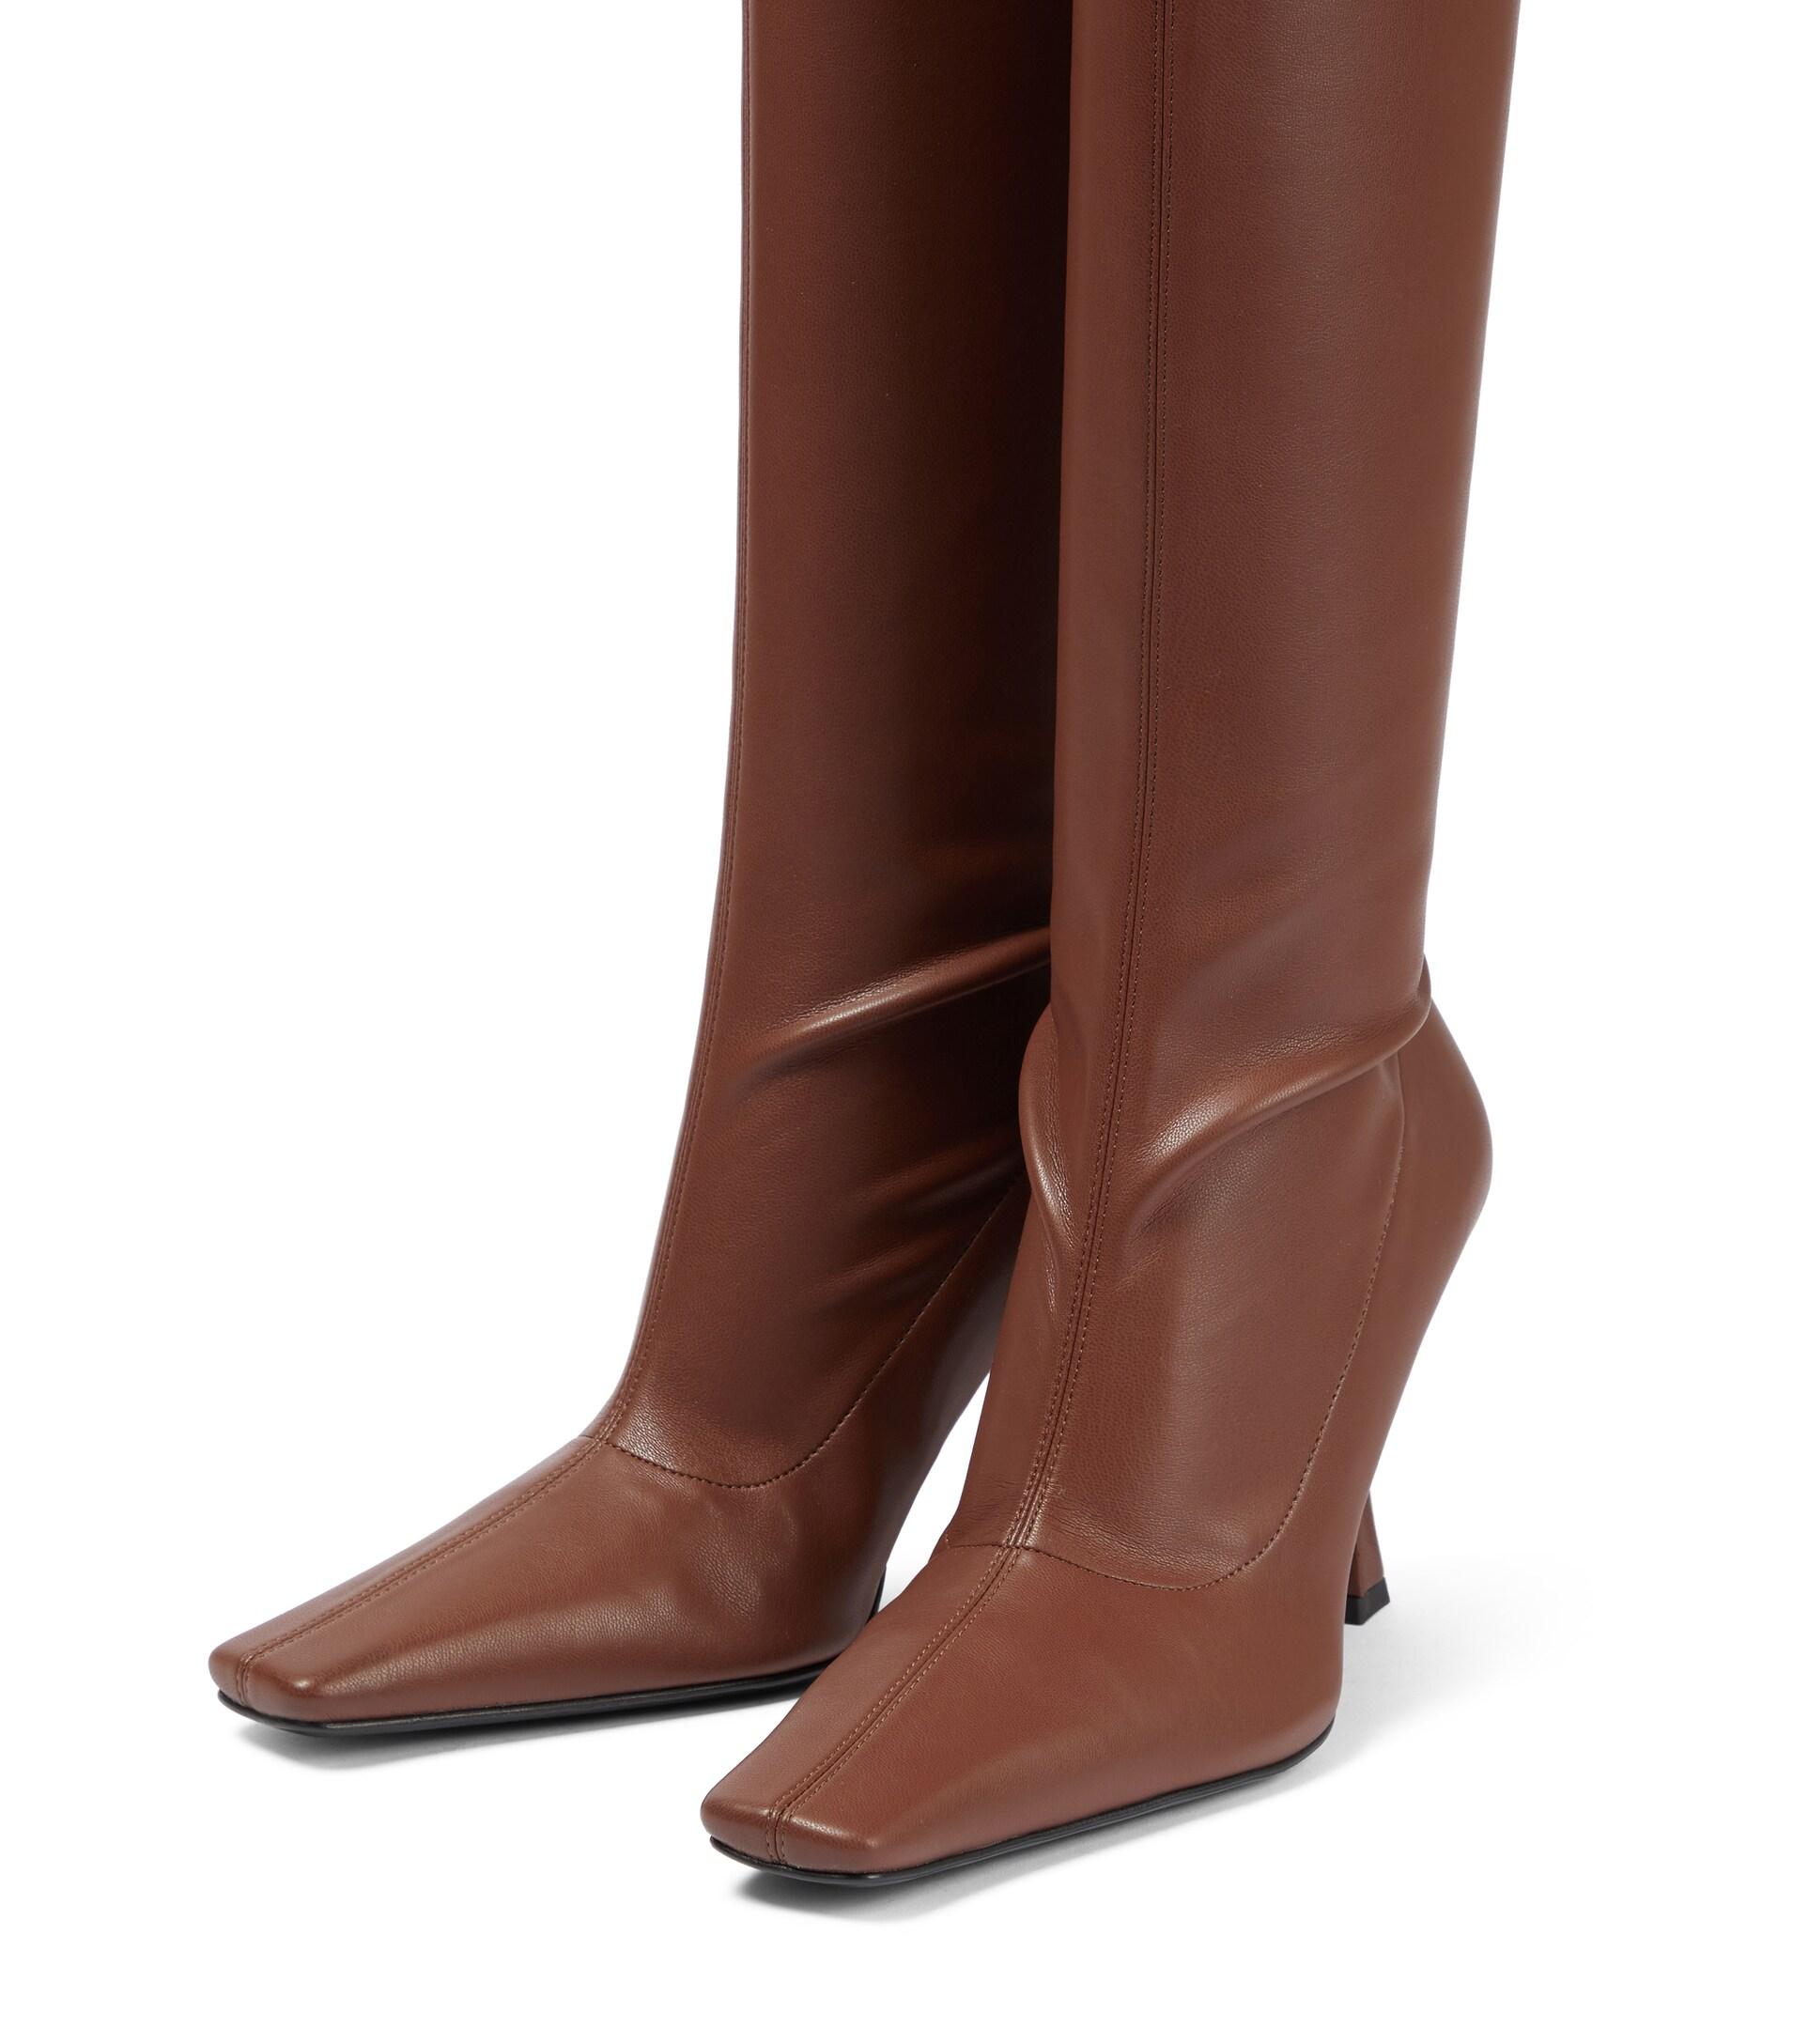 Womens Boots Proenza Schouler Boots Proenza Schouler Leather Ruched Over-the-knee Boots in Brown 